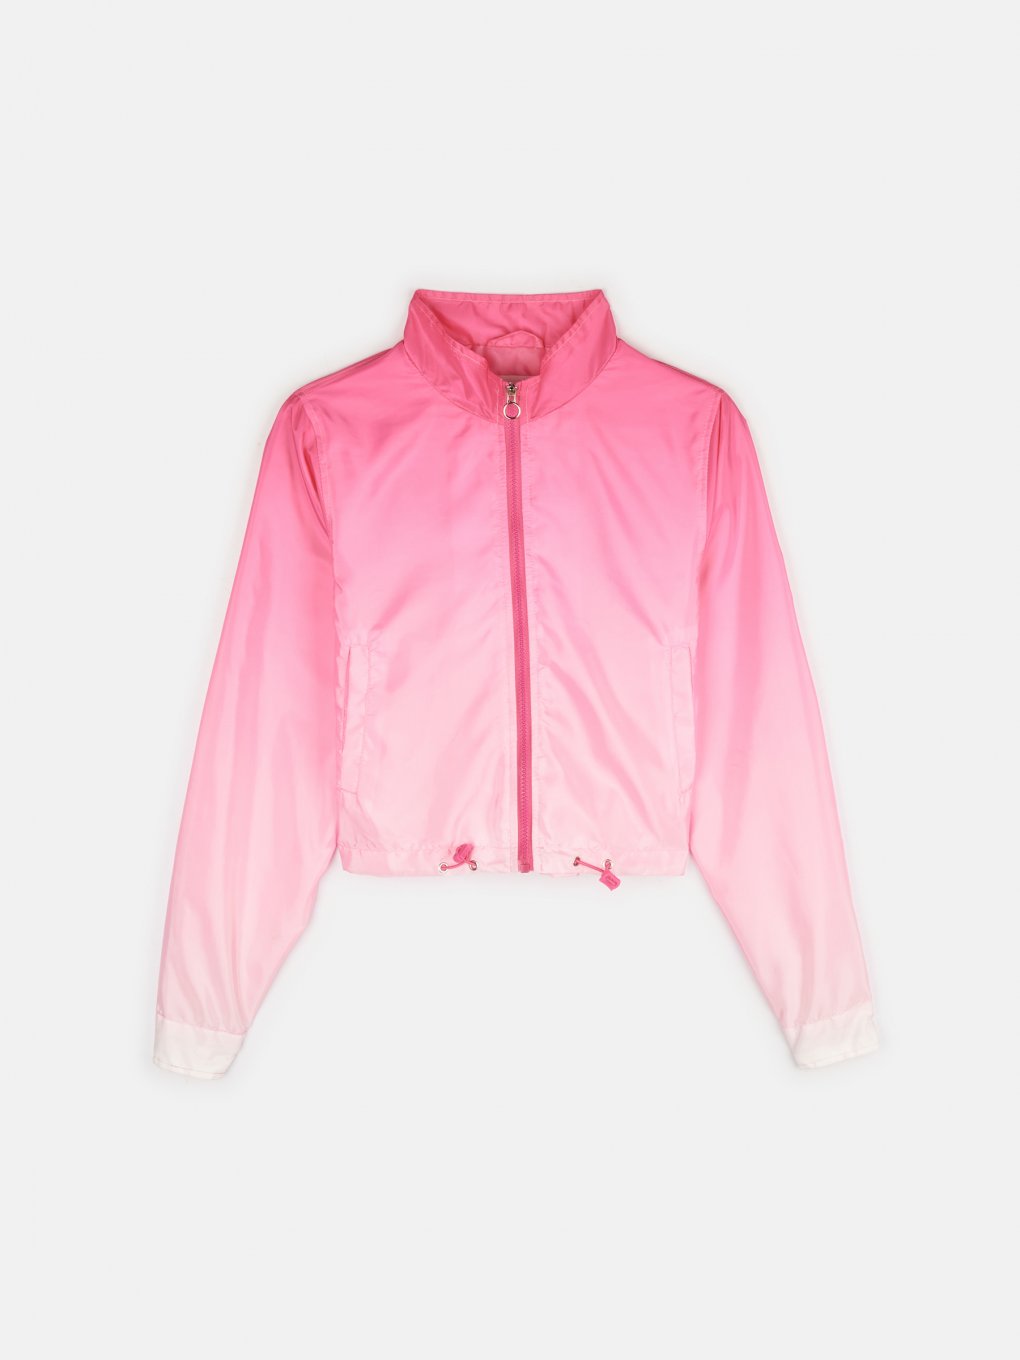 Light jacket with ombre effect